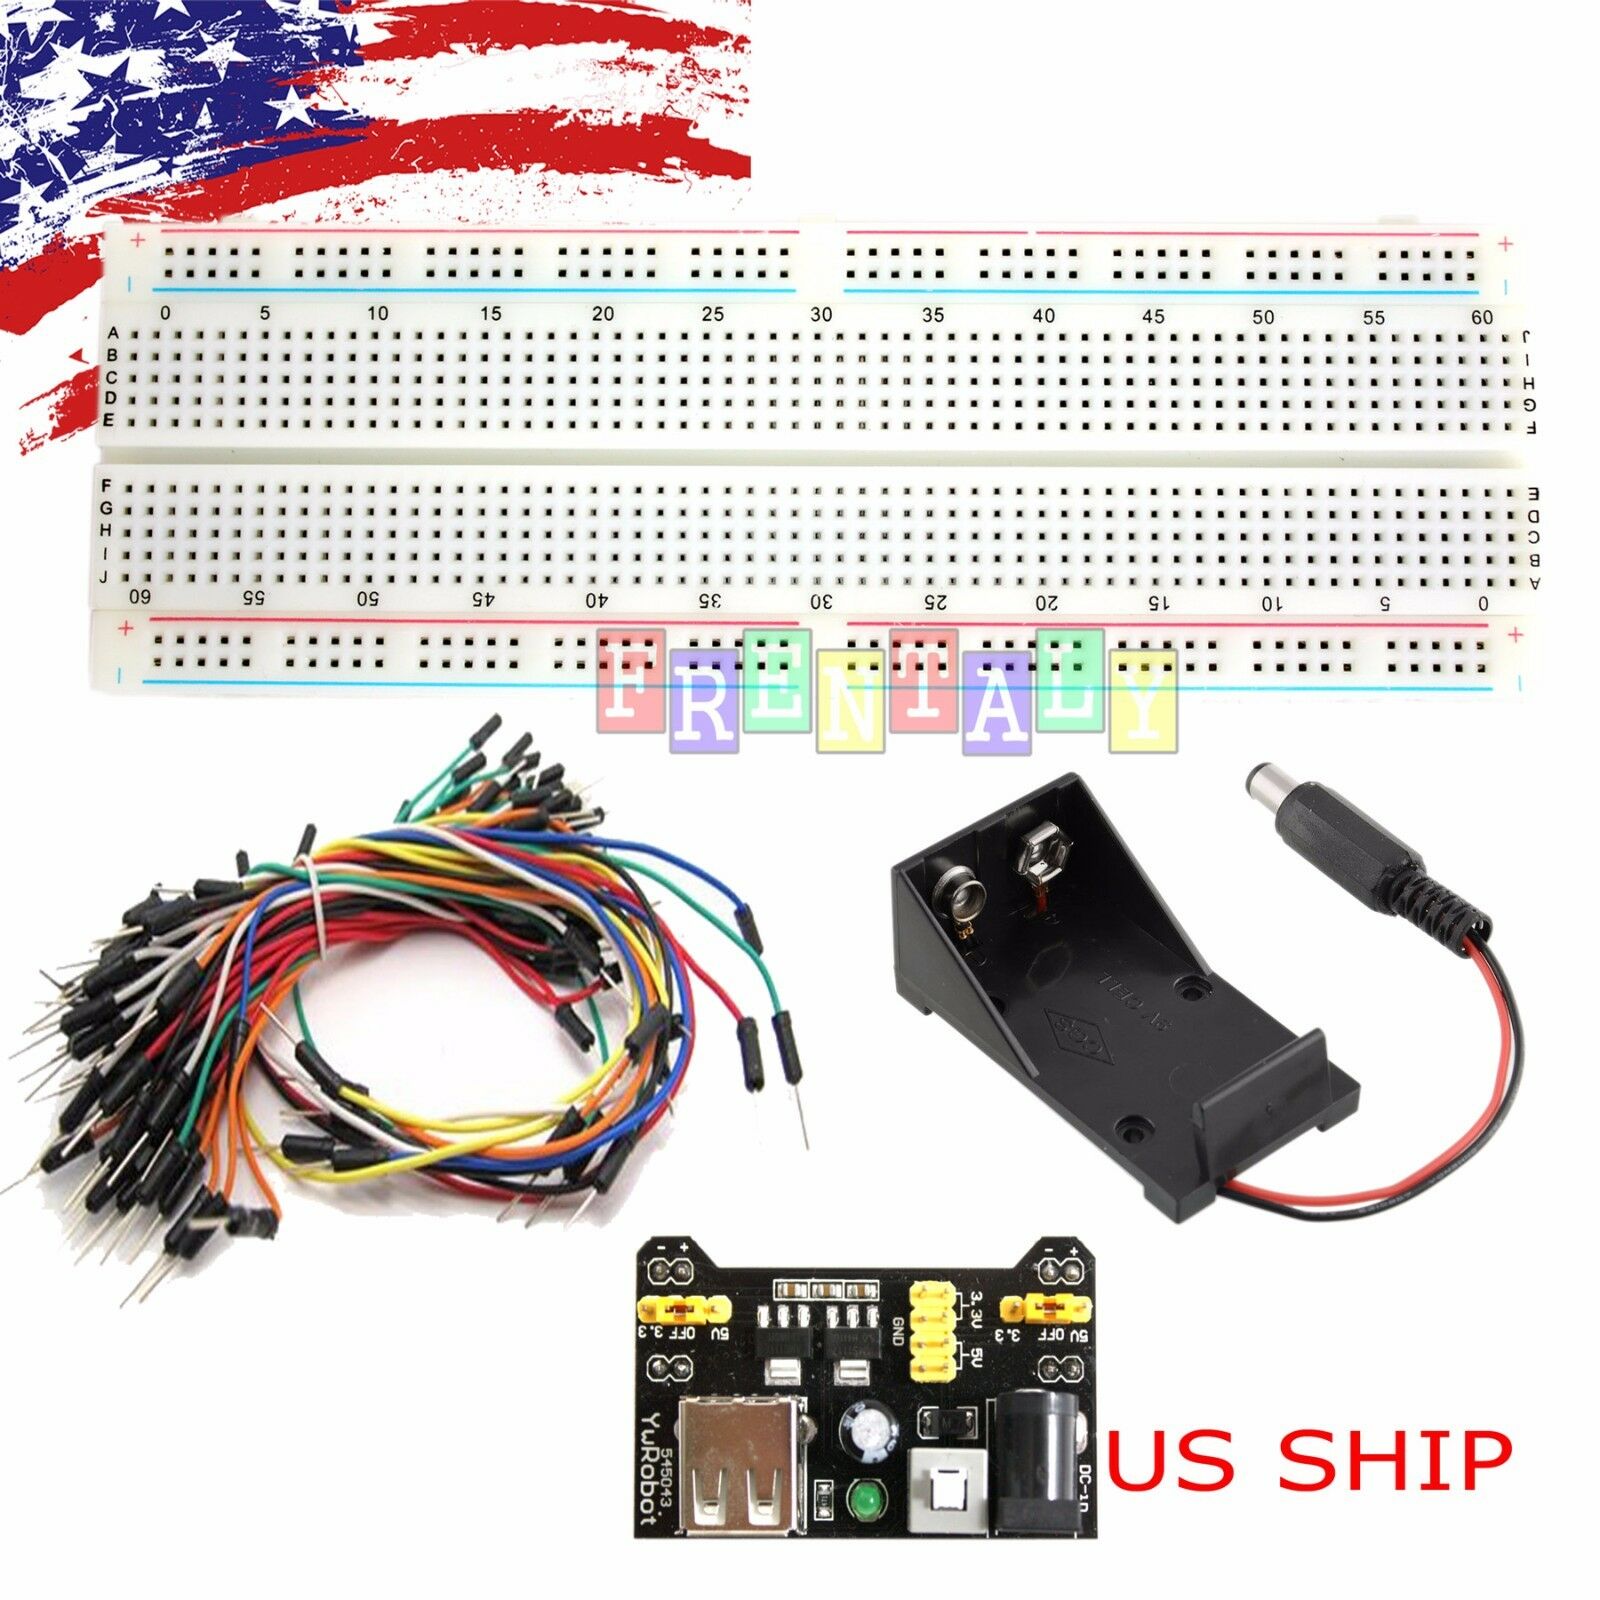 Mb-102 830 Breadboard & Battery Holder & 65pcs Jump Cable Wires & Power Supply